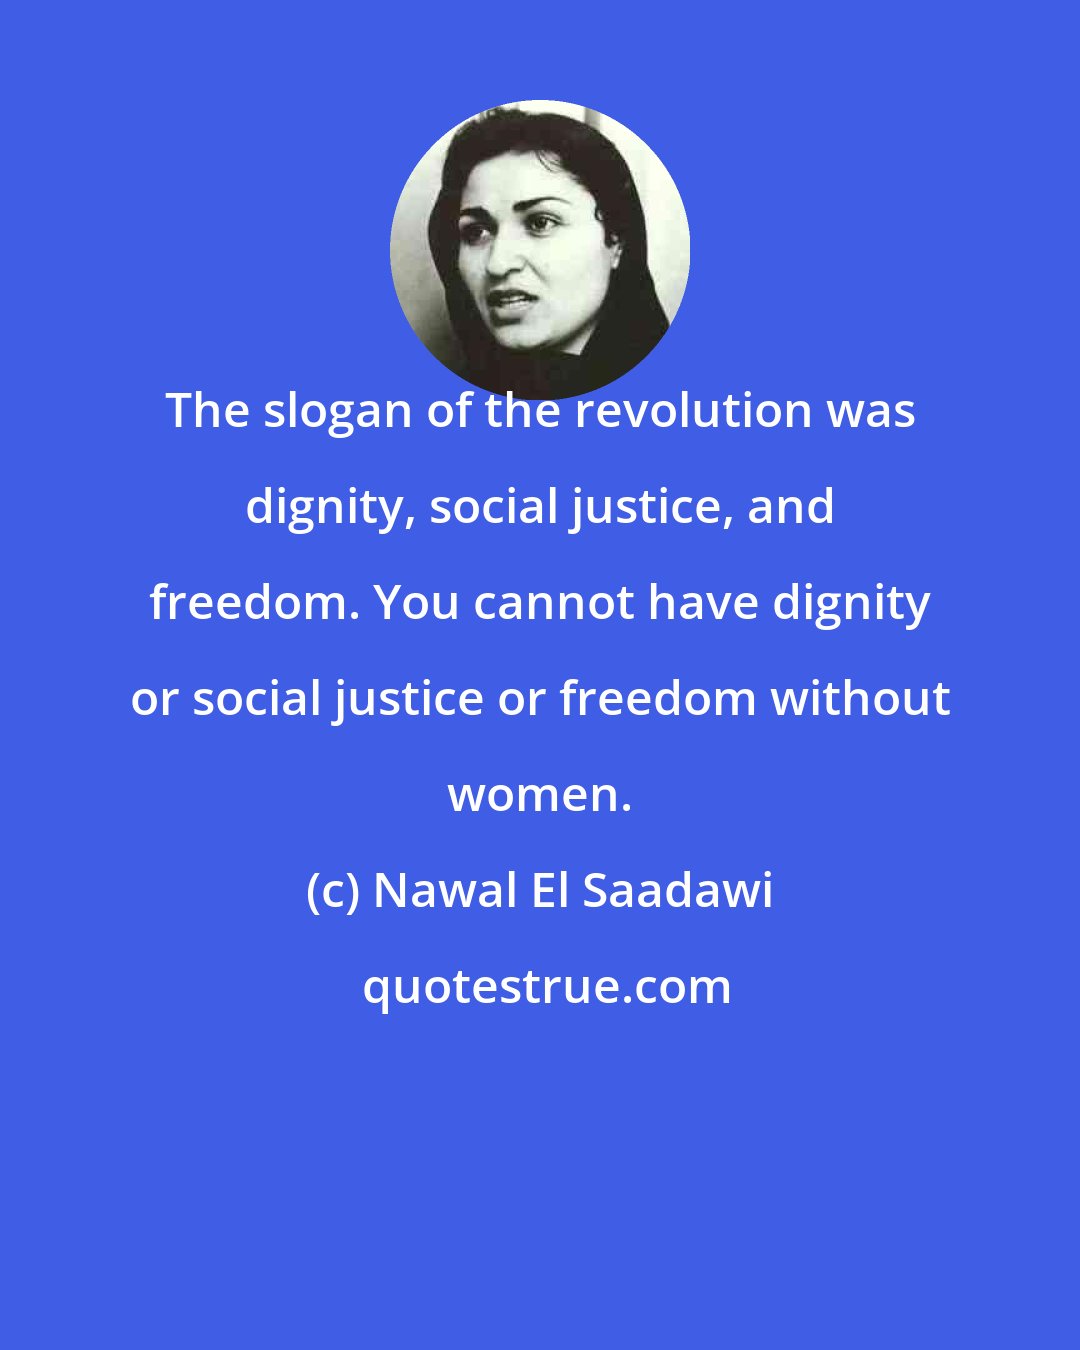 Nawal El Saadawi: The slogan of the revolution was dignity, social justice, and freedom. You cannot have dignity or social justice or freedom without women.